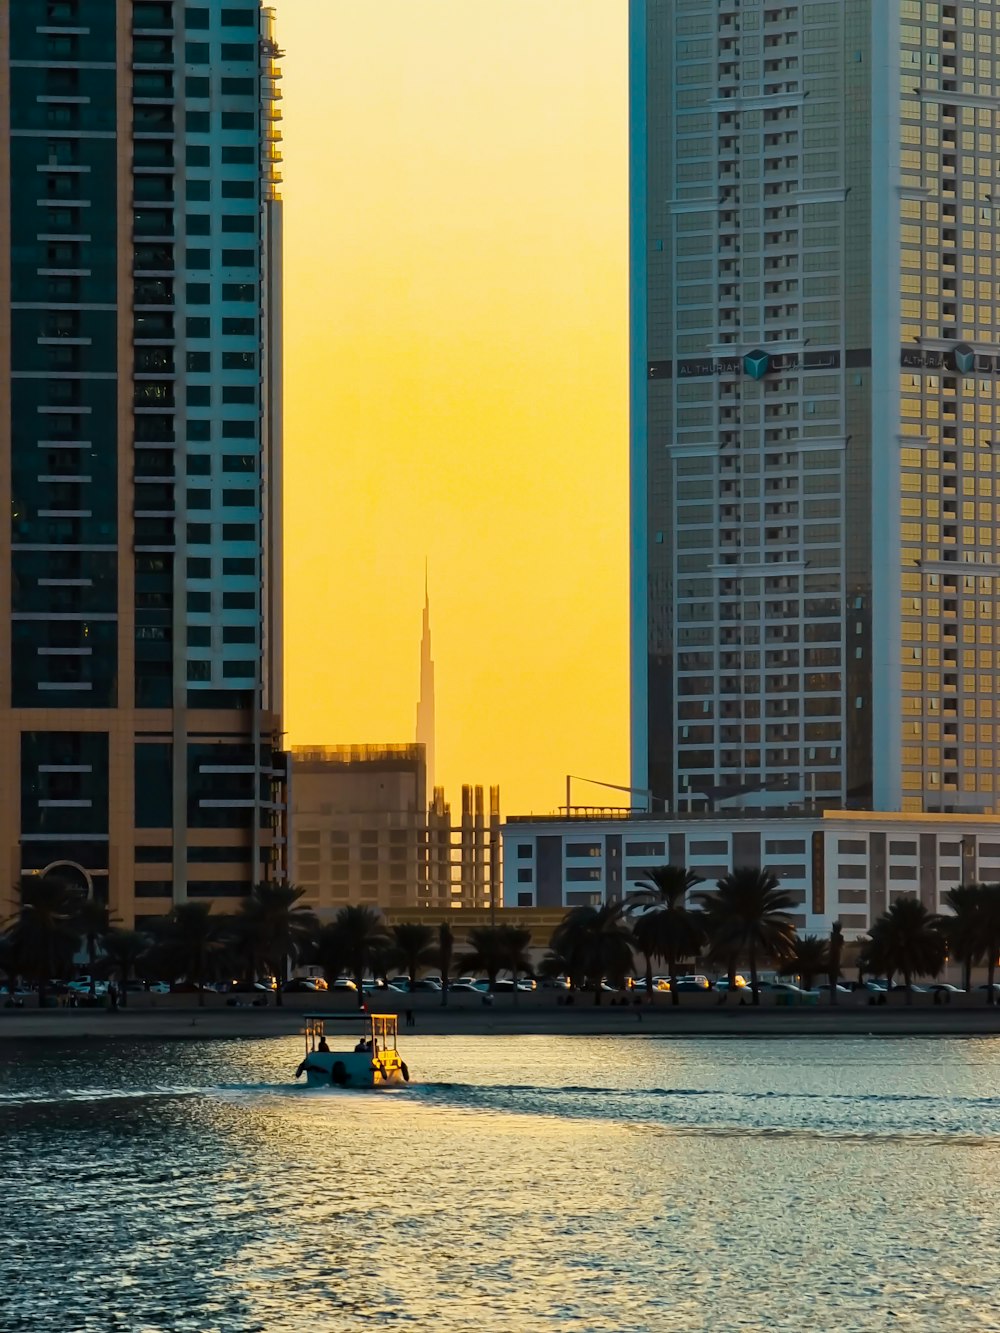 a boat is in the water in front of some tall buildings